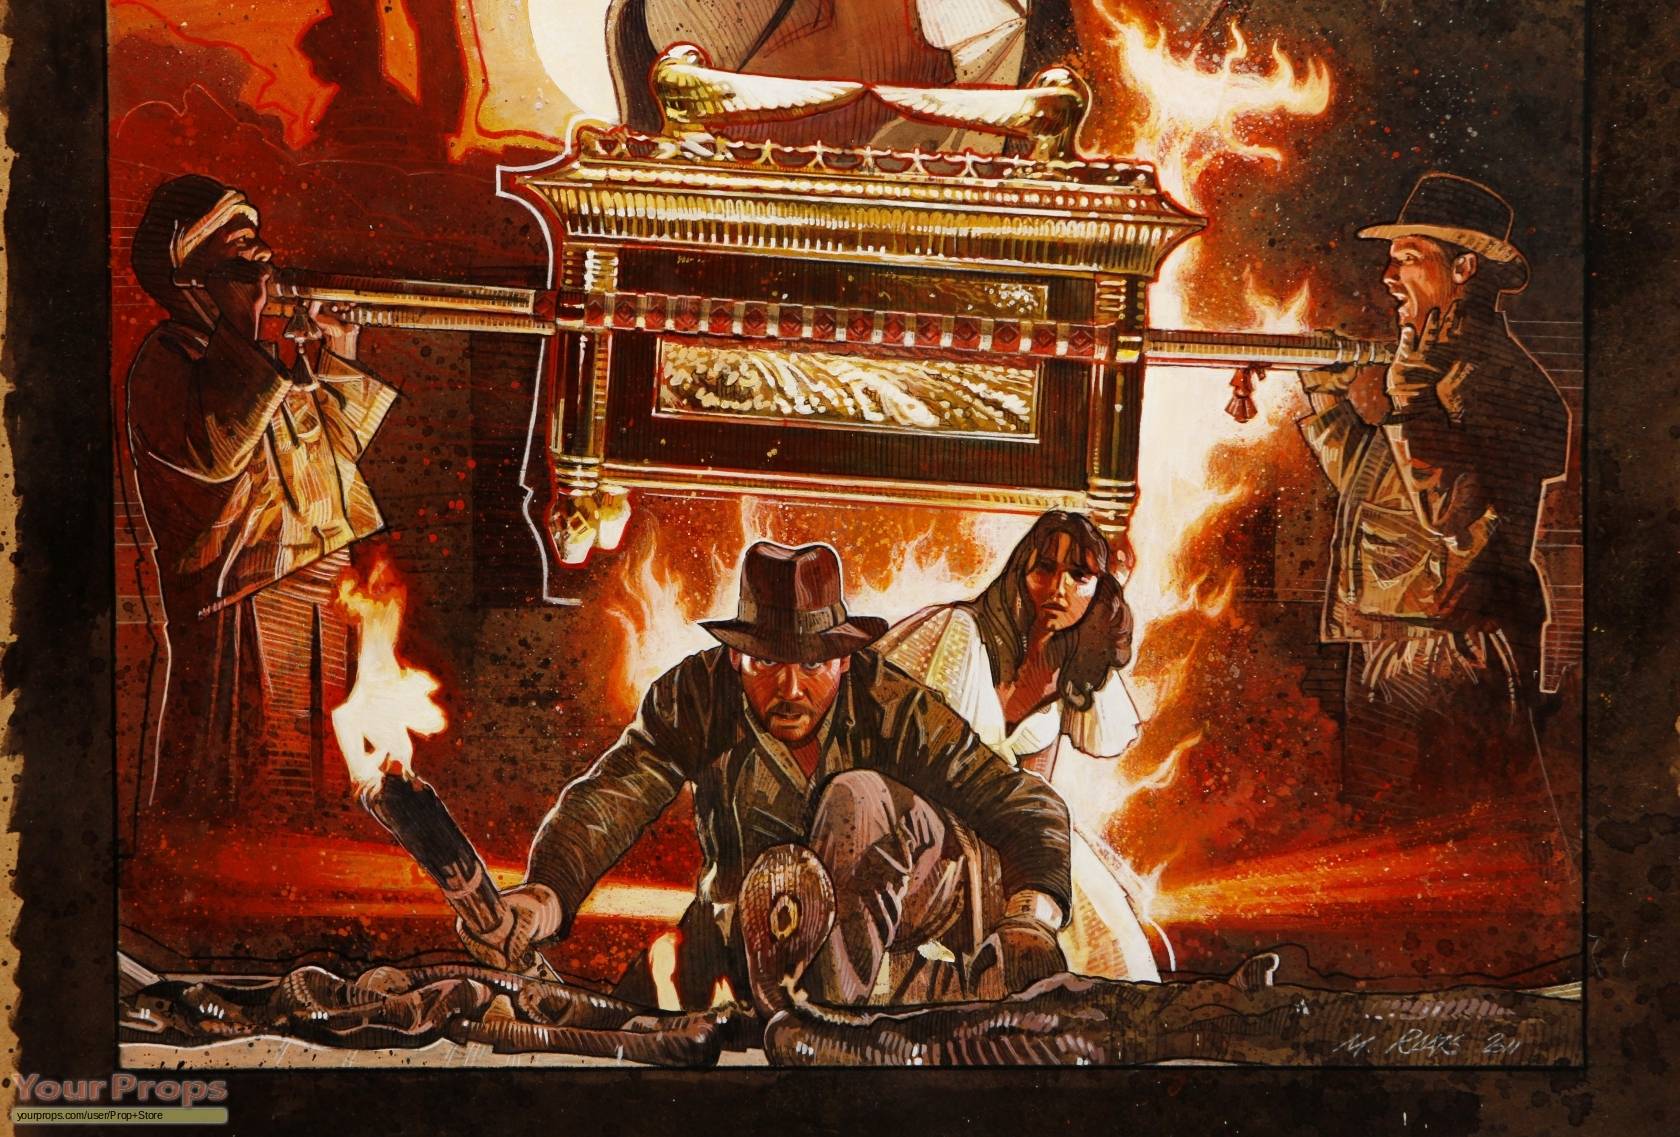 Raiders of the Lost Ark Background